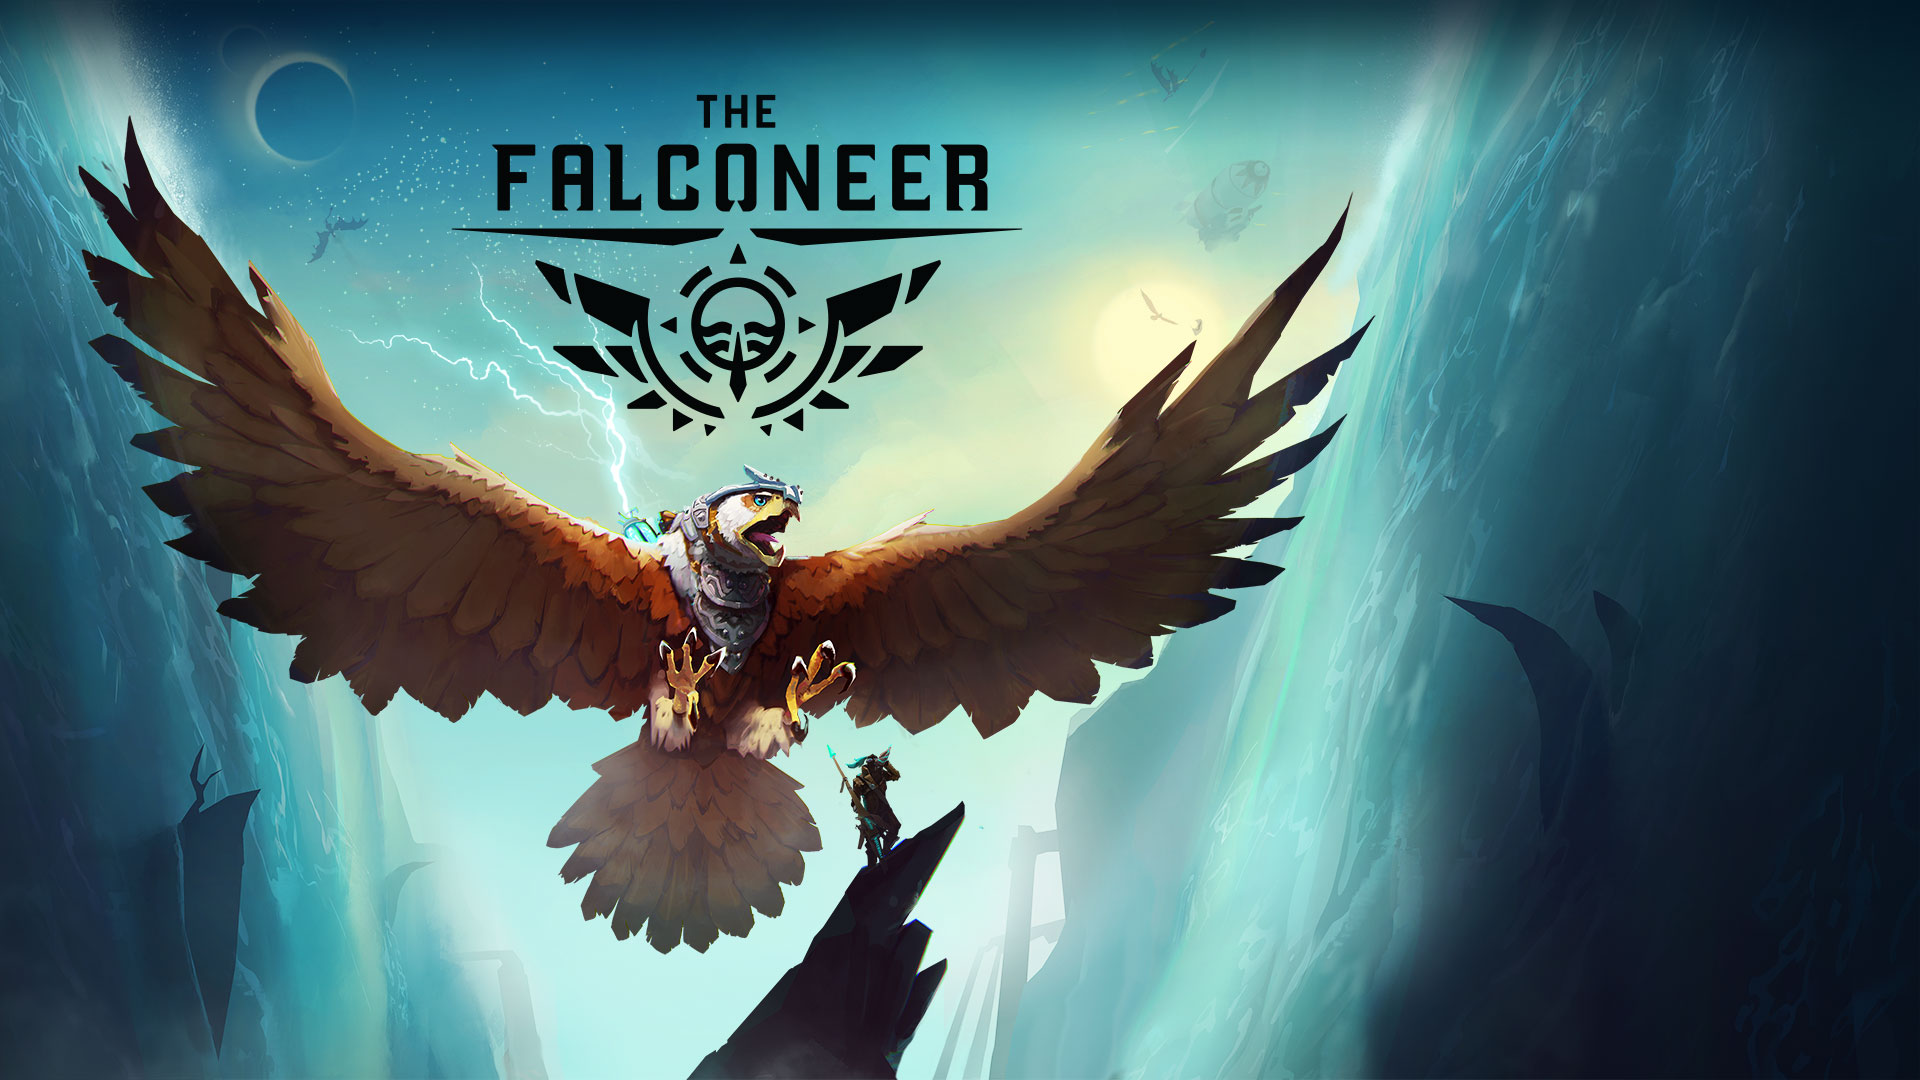 the falconeer game pass